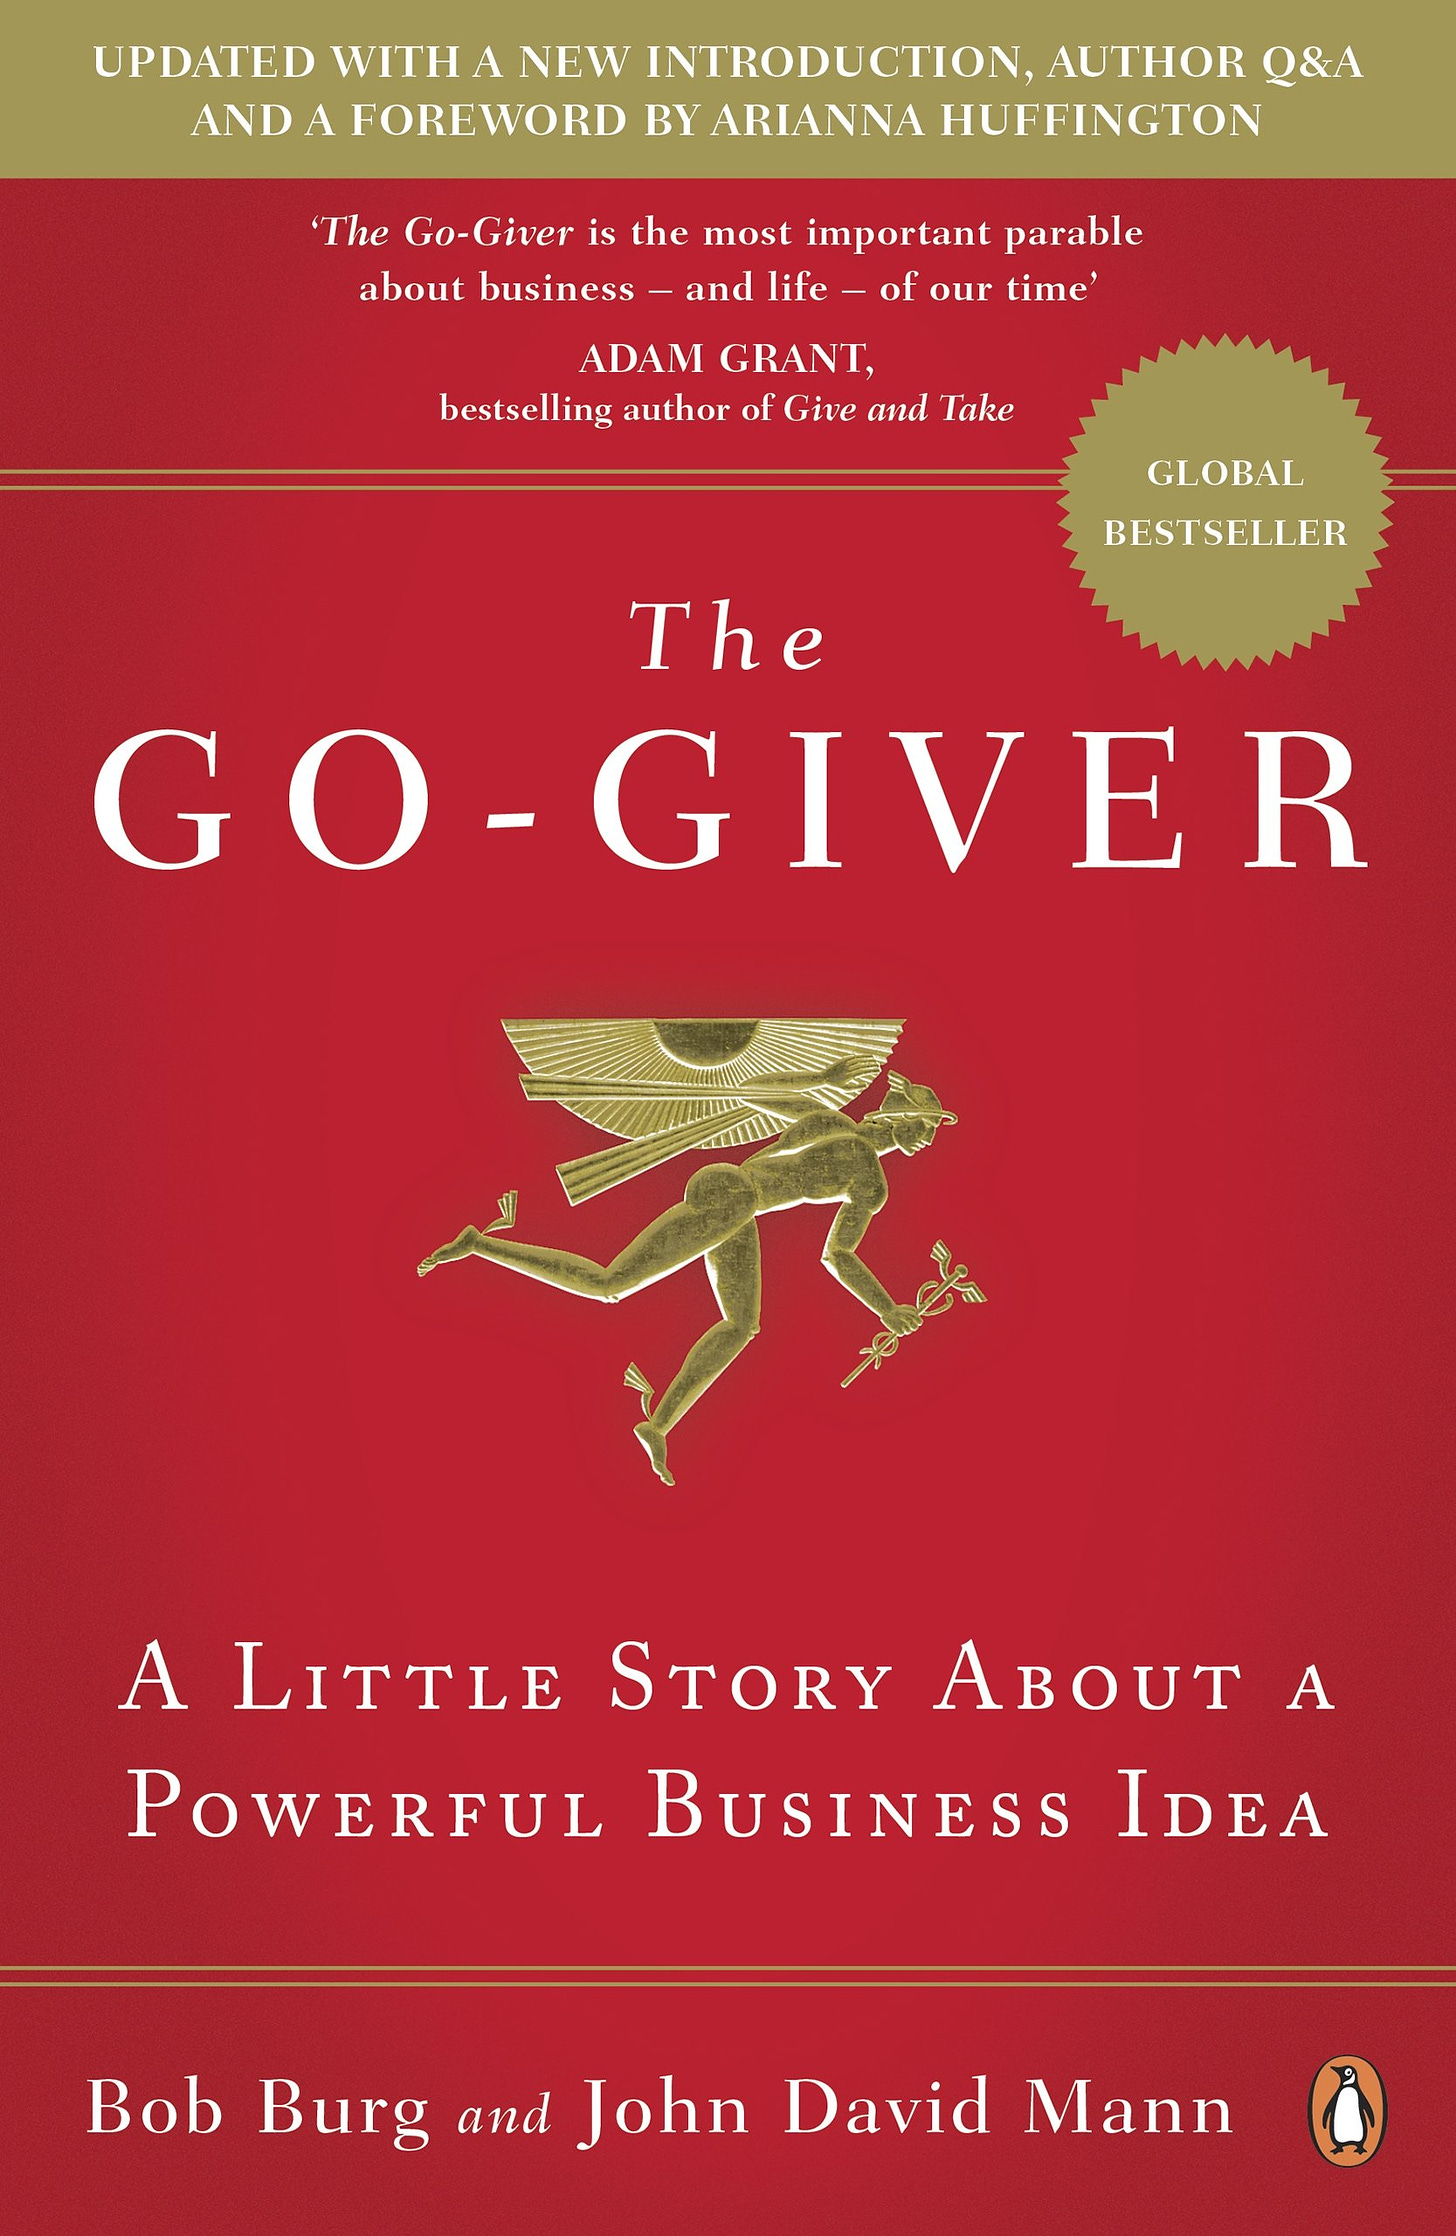 Buy The Go-Giver: A Little Story About a Powerful Business Idea Book Online  at Low Prices in India | The Go-Giver: A Little Story About a Powerful  Business Idea Reviews & Ratings